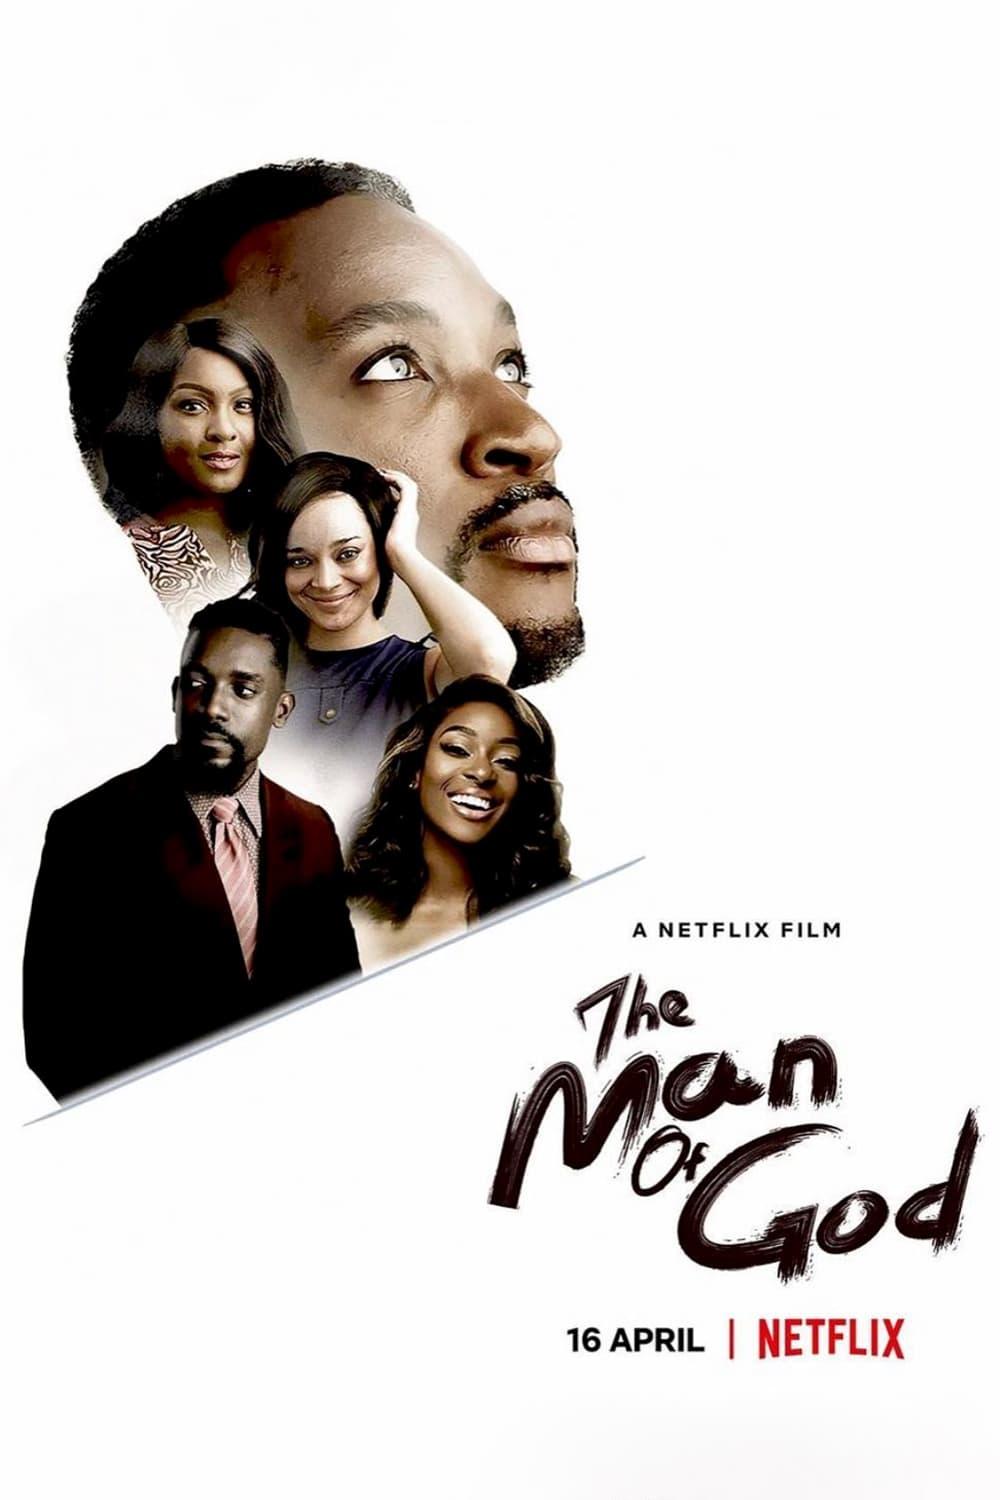 The Man of God poster